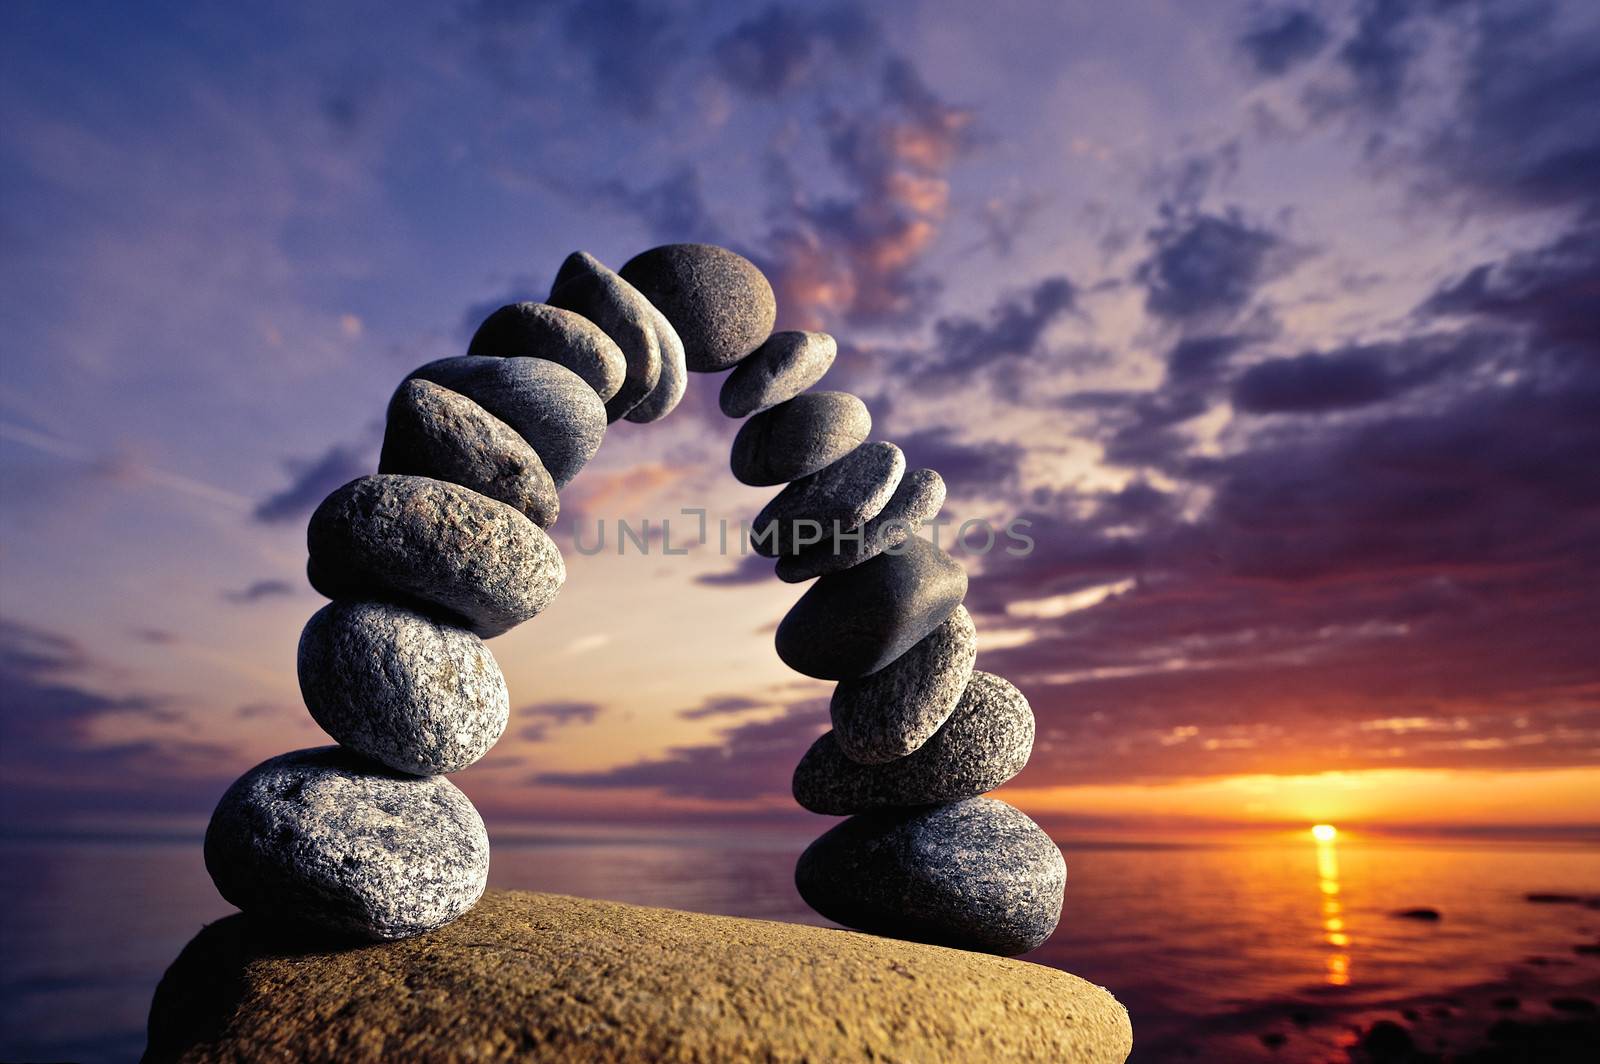 Balancing of pebbles on the boulder in the evening